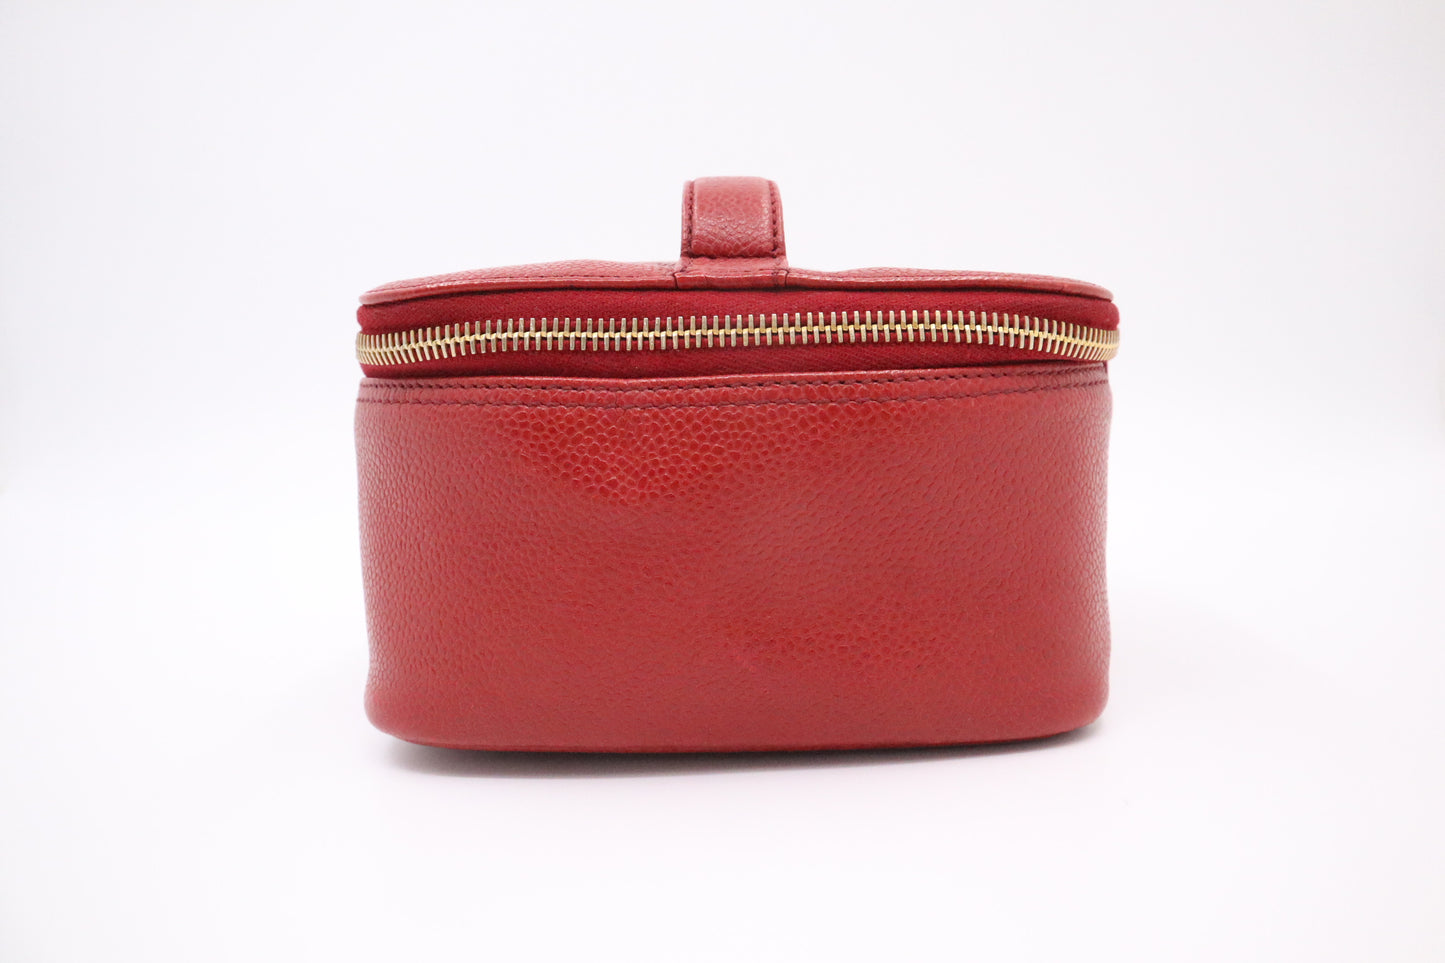 Chanel Vanity Pouch in Red Caviar Leather